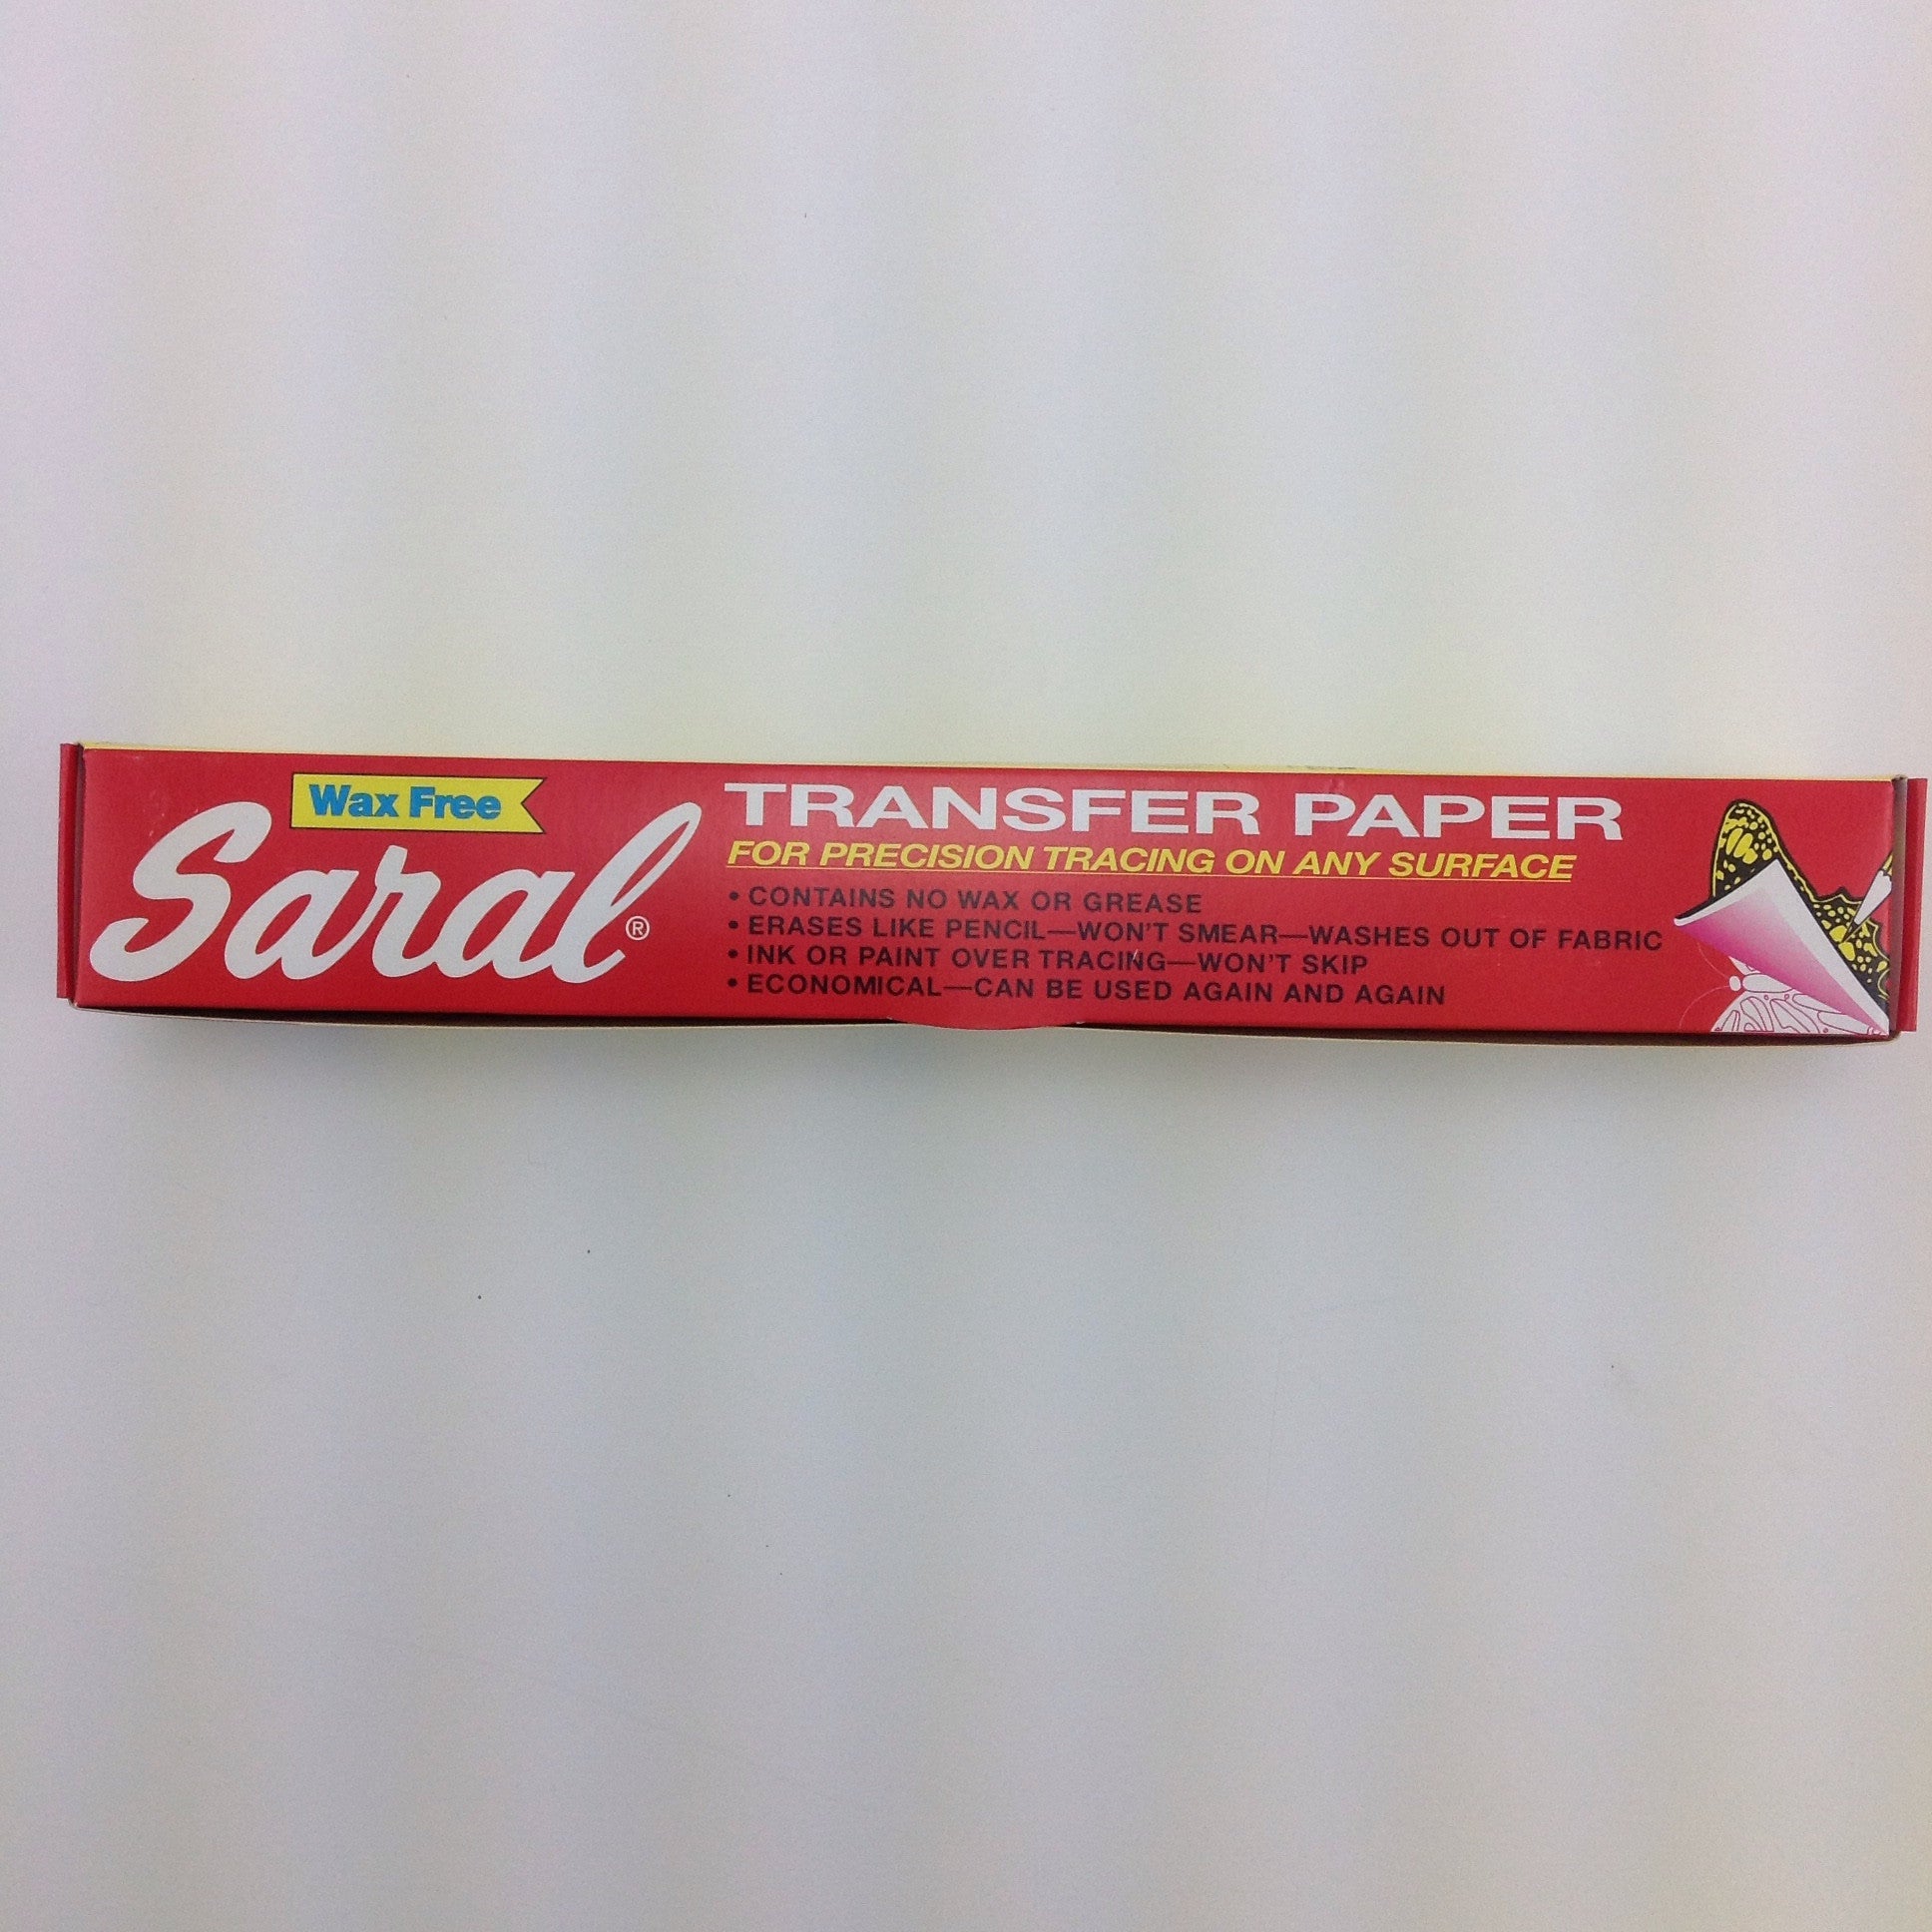 Saral Transfer paper 12 foot rolls in graphite and white